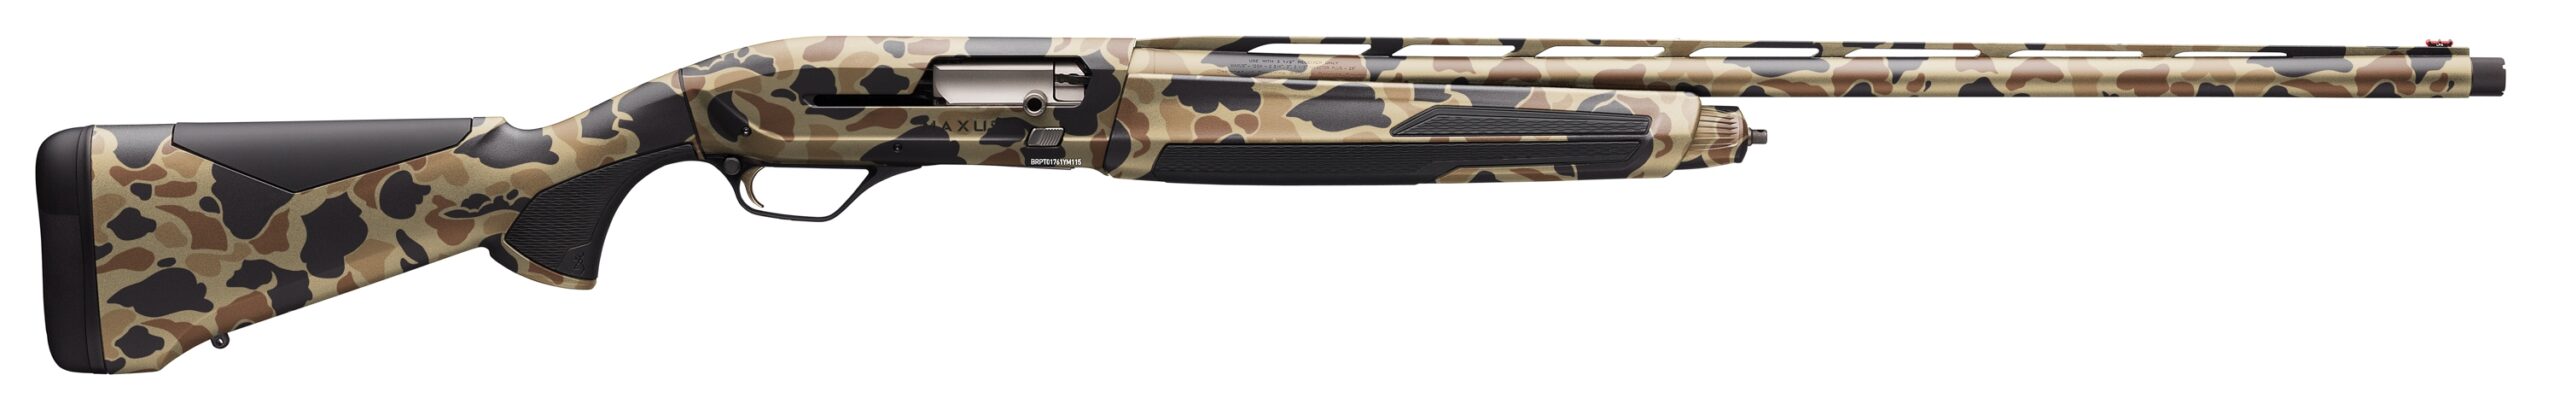 The Maxus II is available in this old-school vintage tan camo.